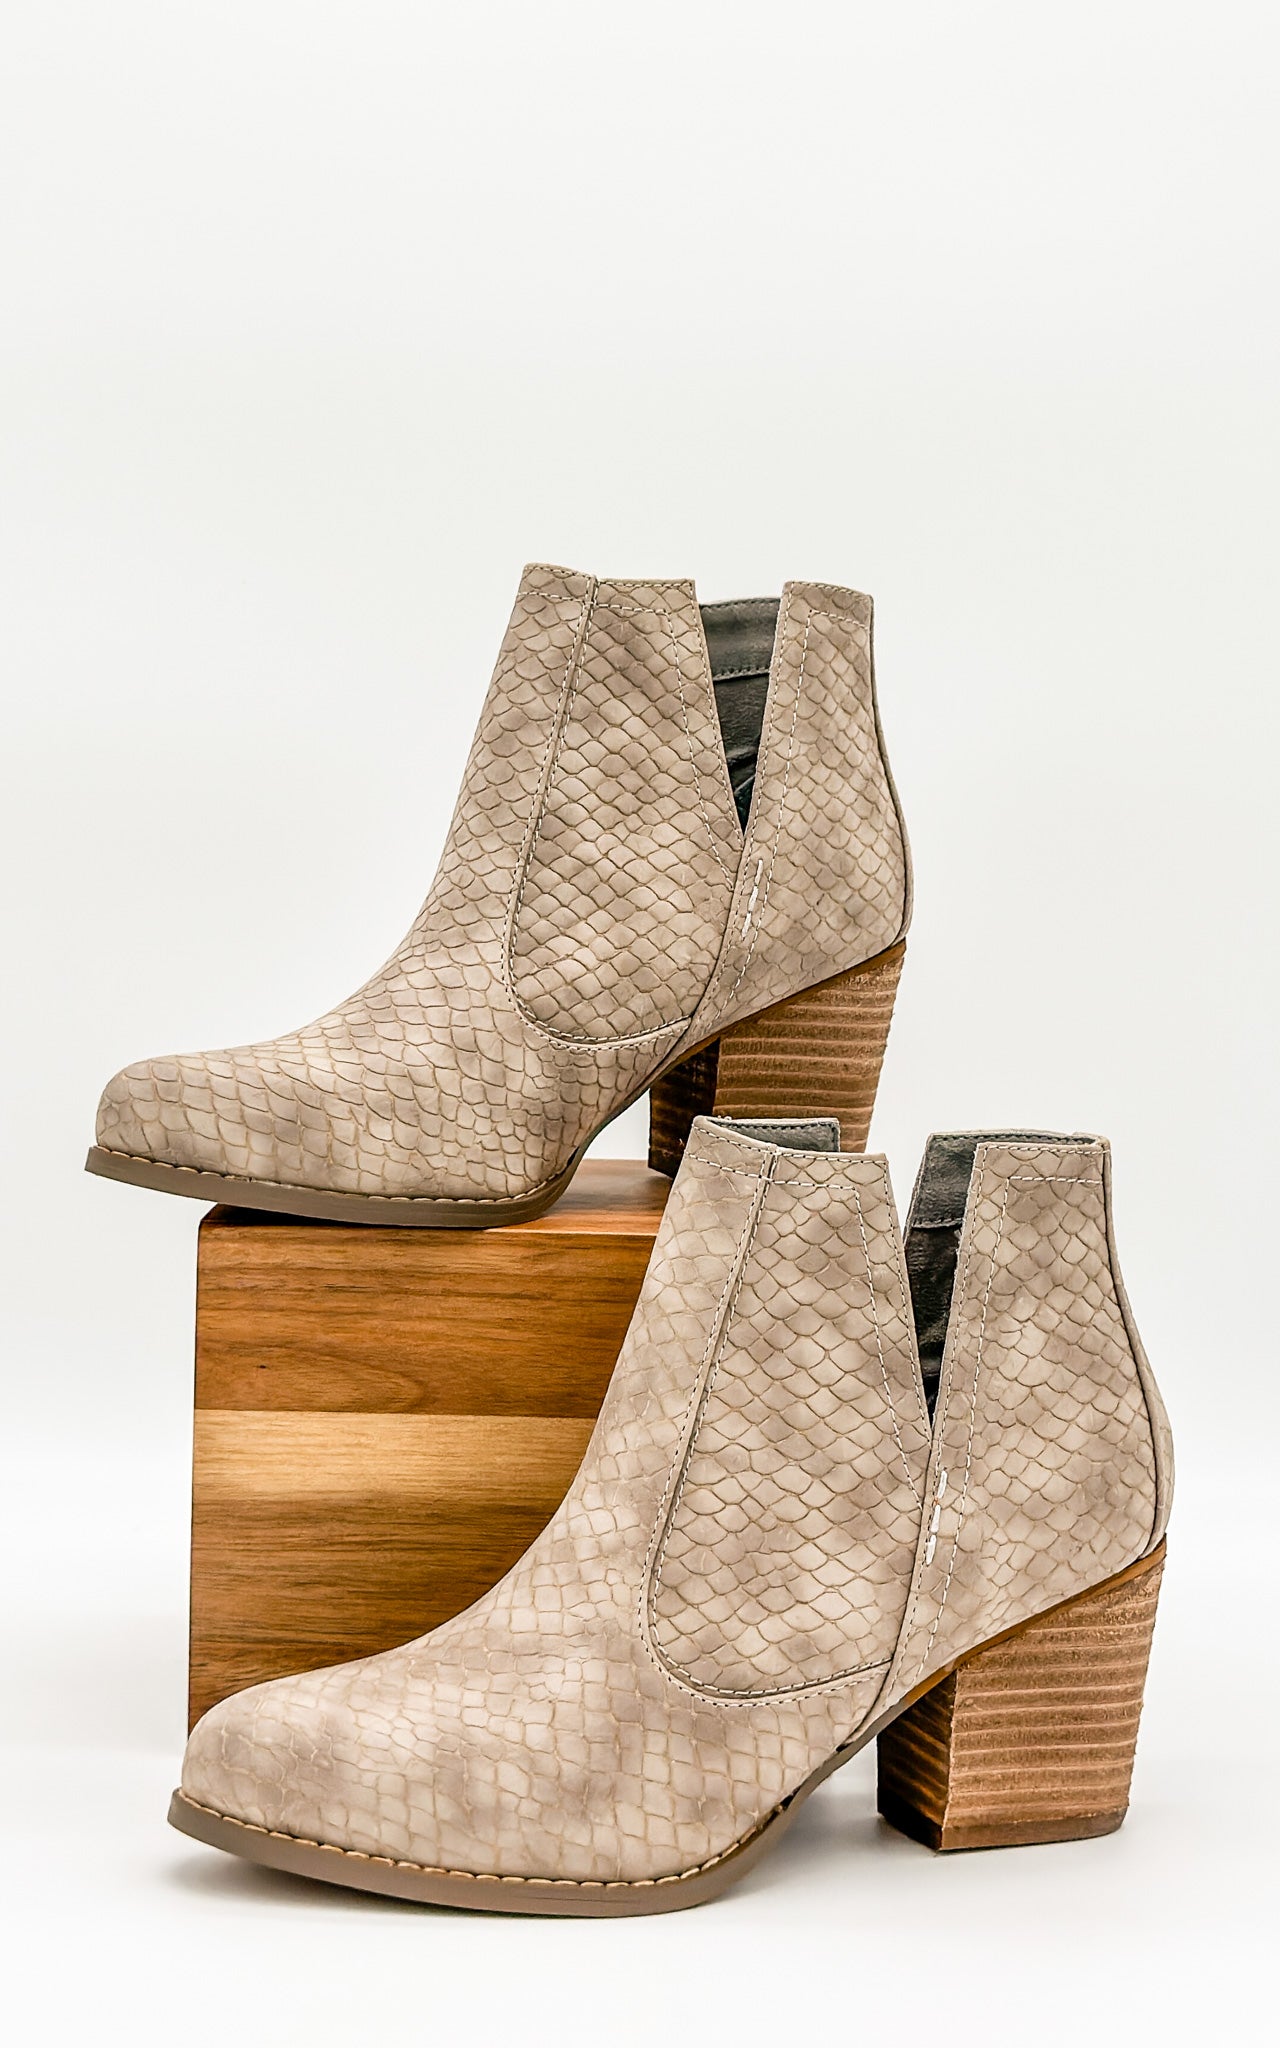 Tarim Bootie in Taupe